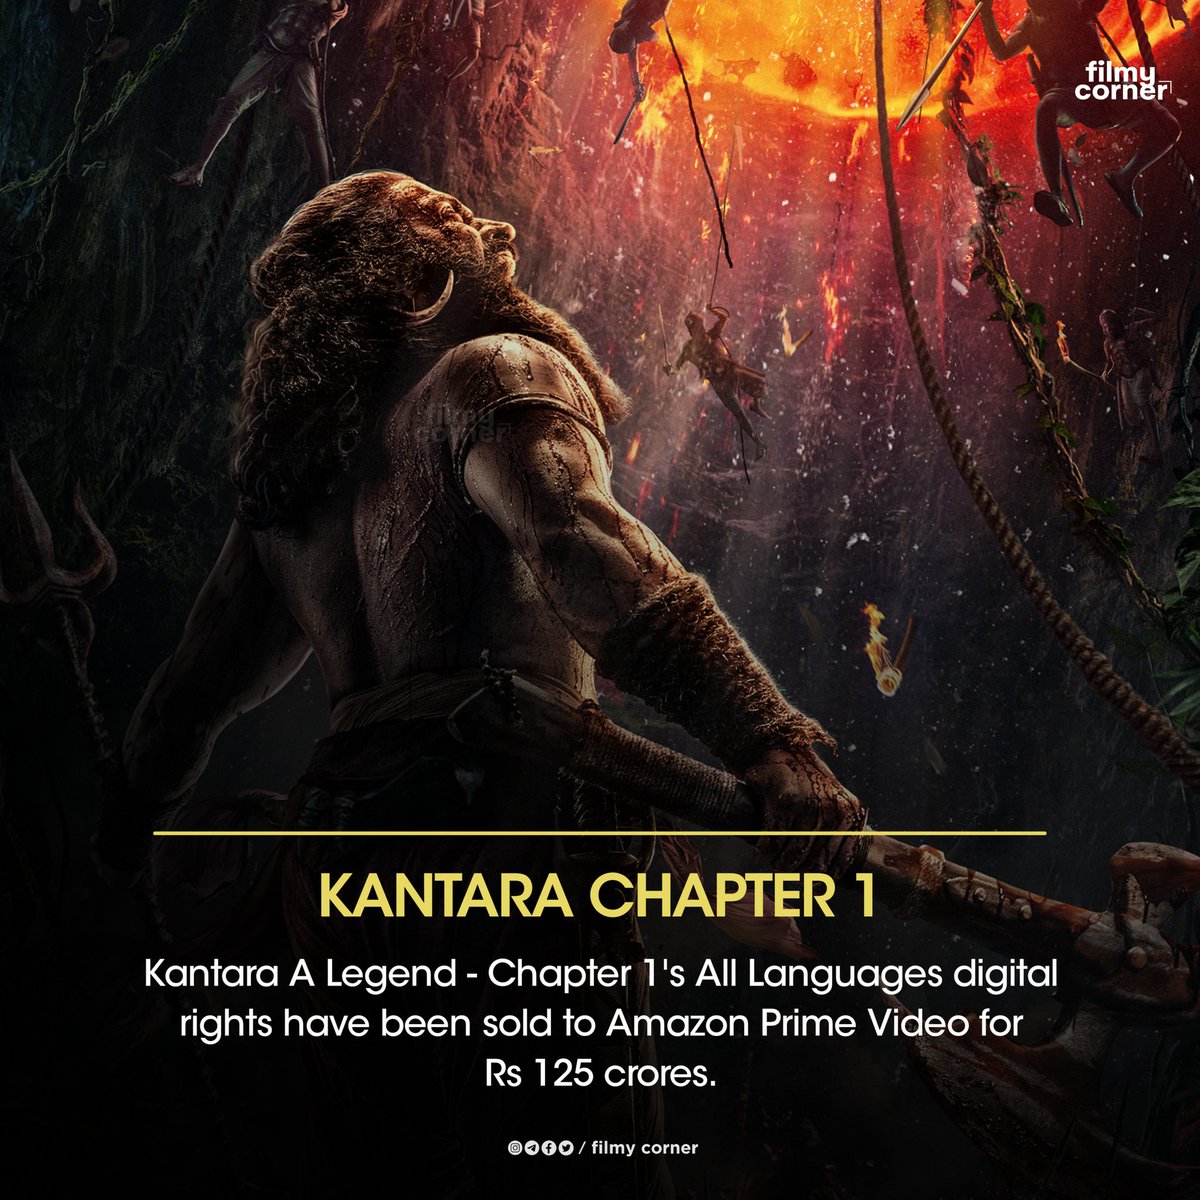 Kantara A Legend - Chapter 1's digital rights have been sold to Amazon Prime Video for Rs 125 crores. #Kantara #RishabShetty Source pinkvilla.com/entertainment/…